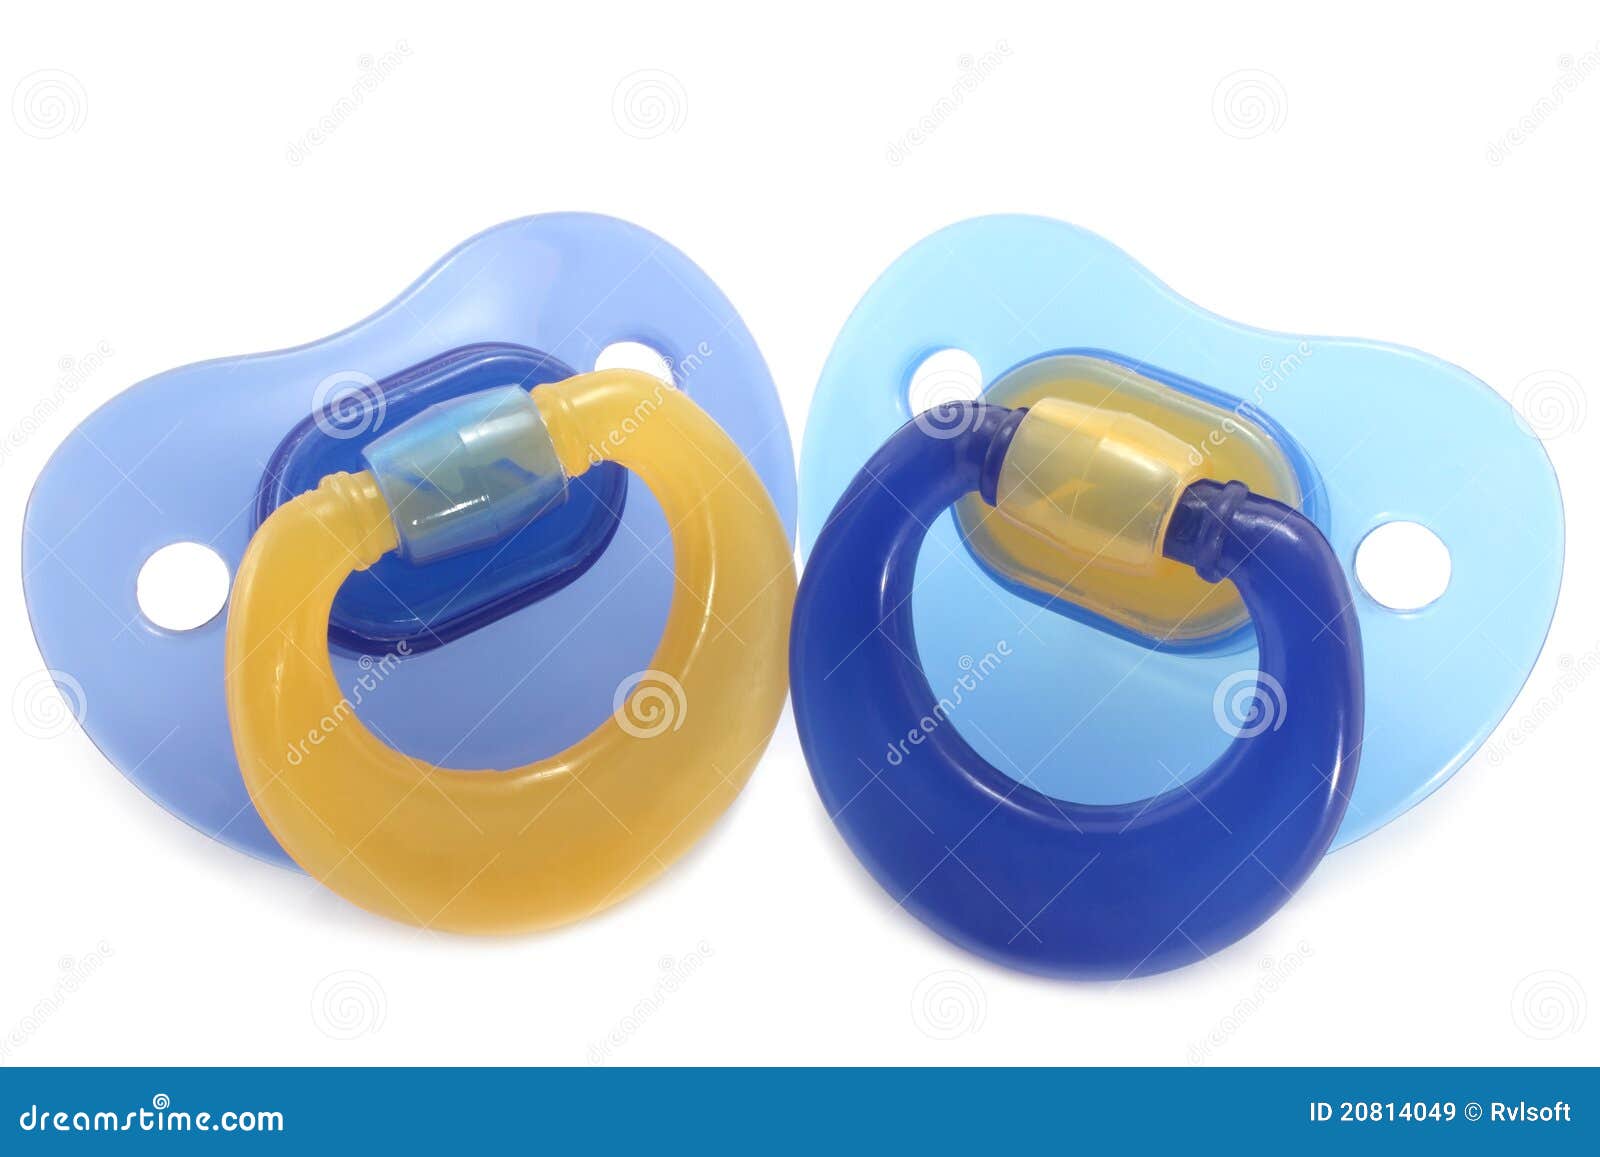 Two pacifiers close-up stock image. Image of child, elastomeric - 20814049